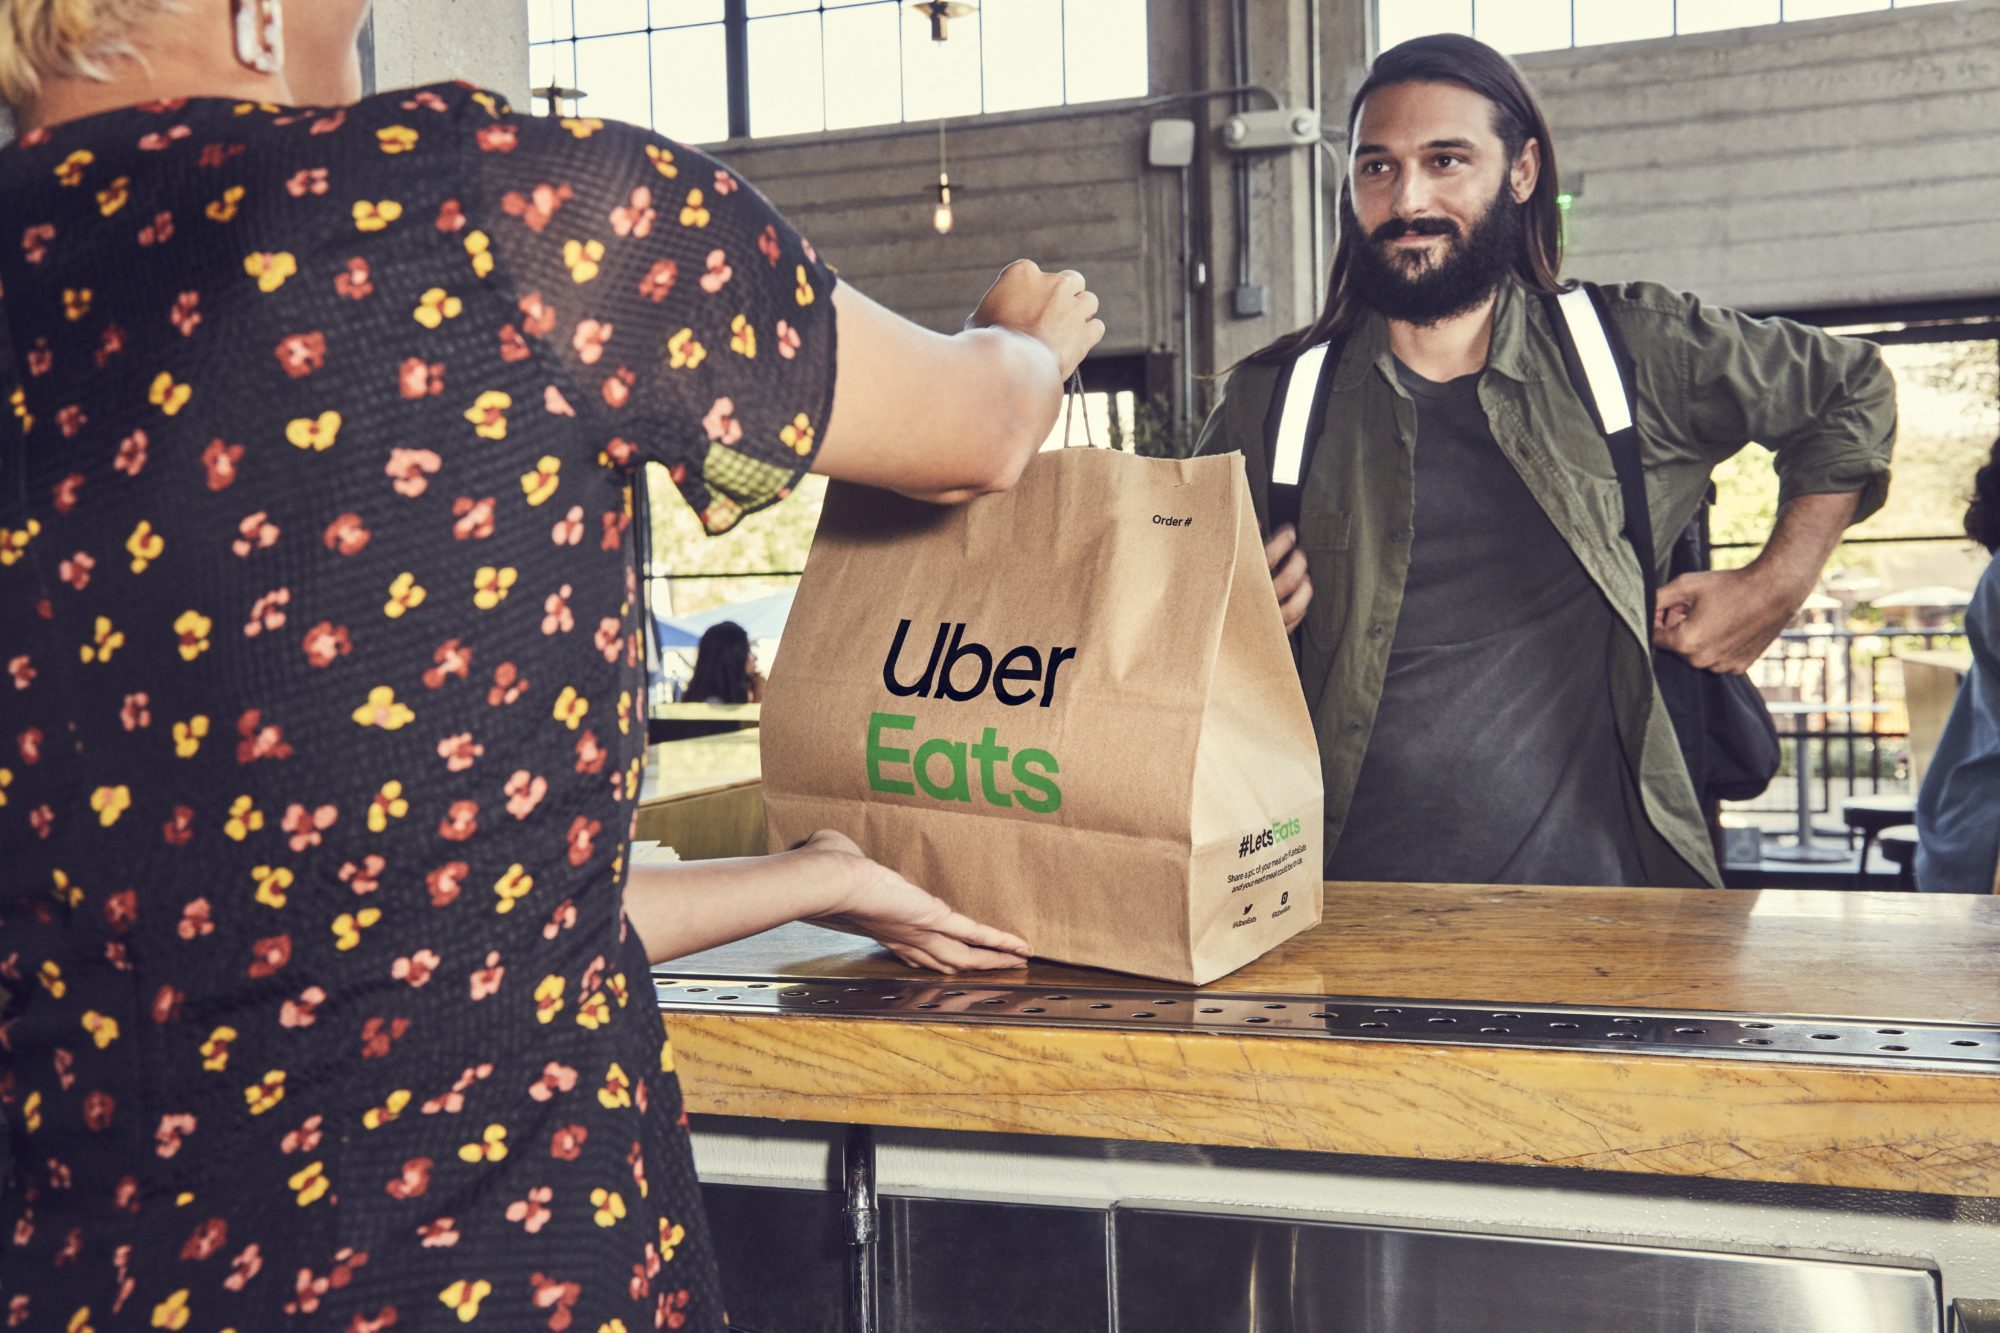 Uber Eats delivery example